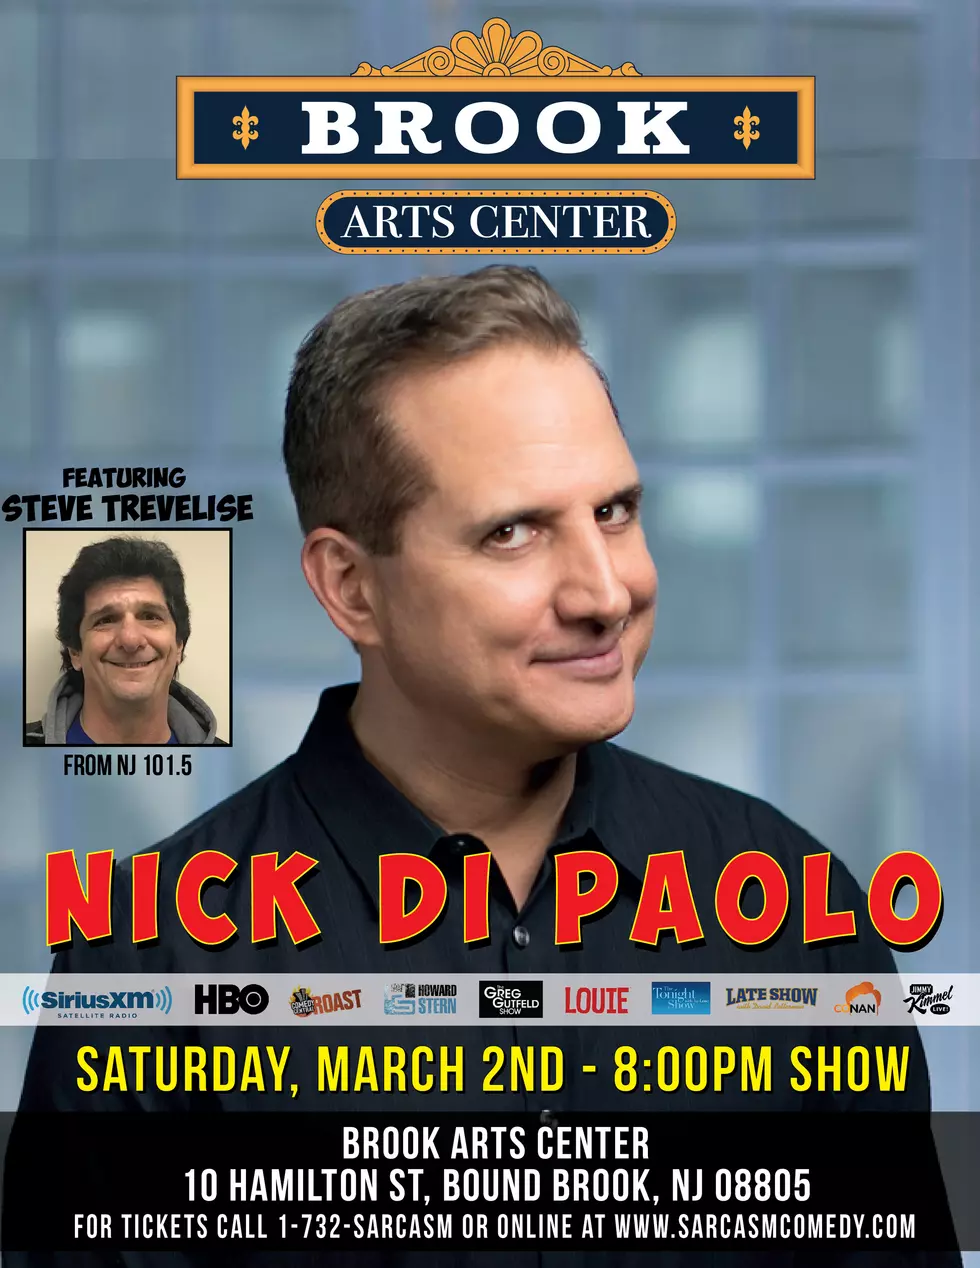 See Nick Di Paolo and Trev at the Brook Arts Center